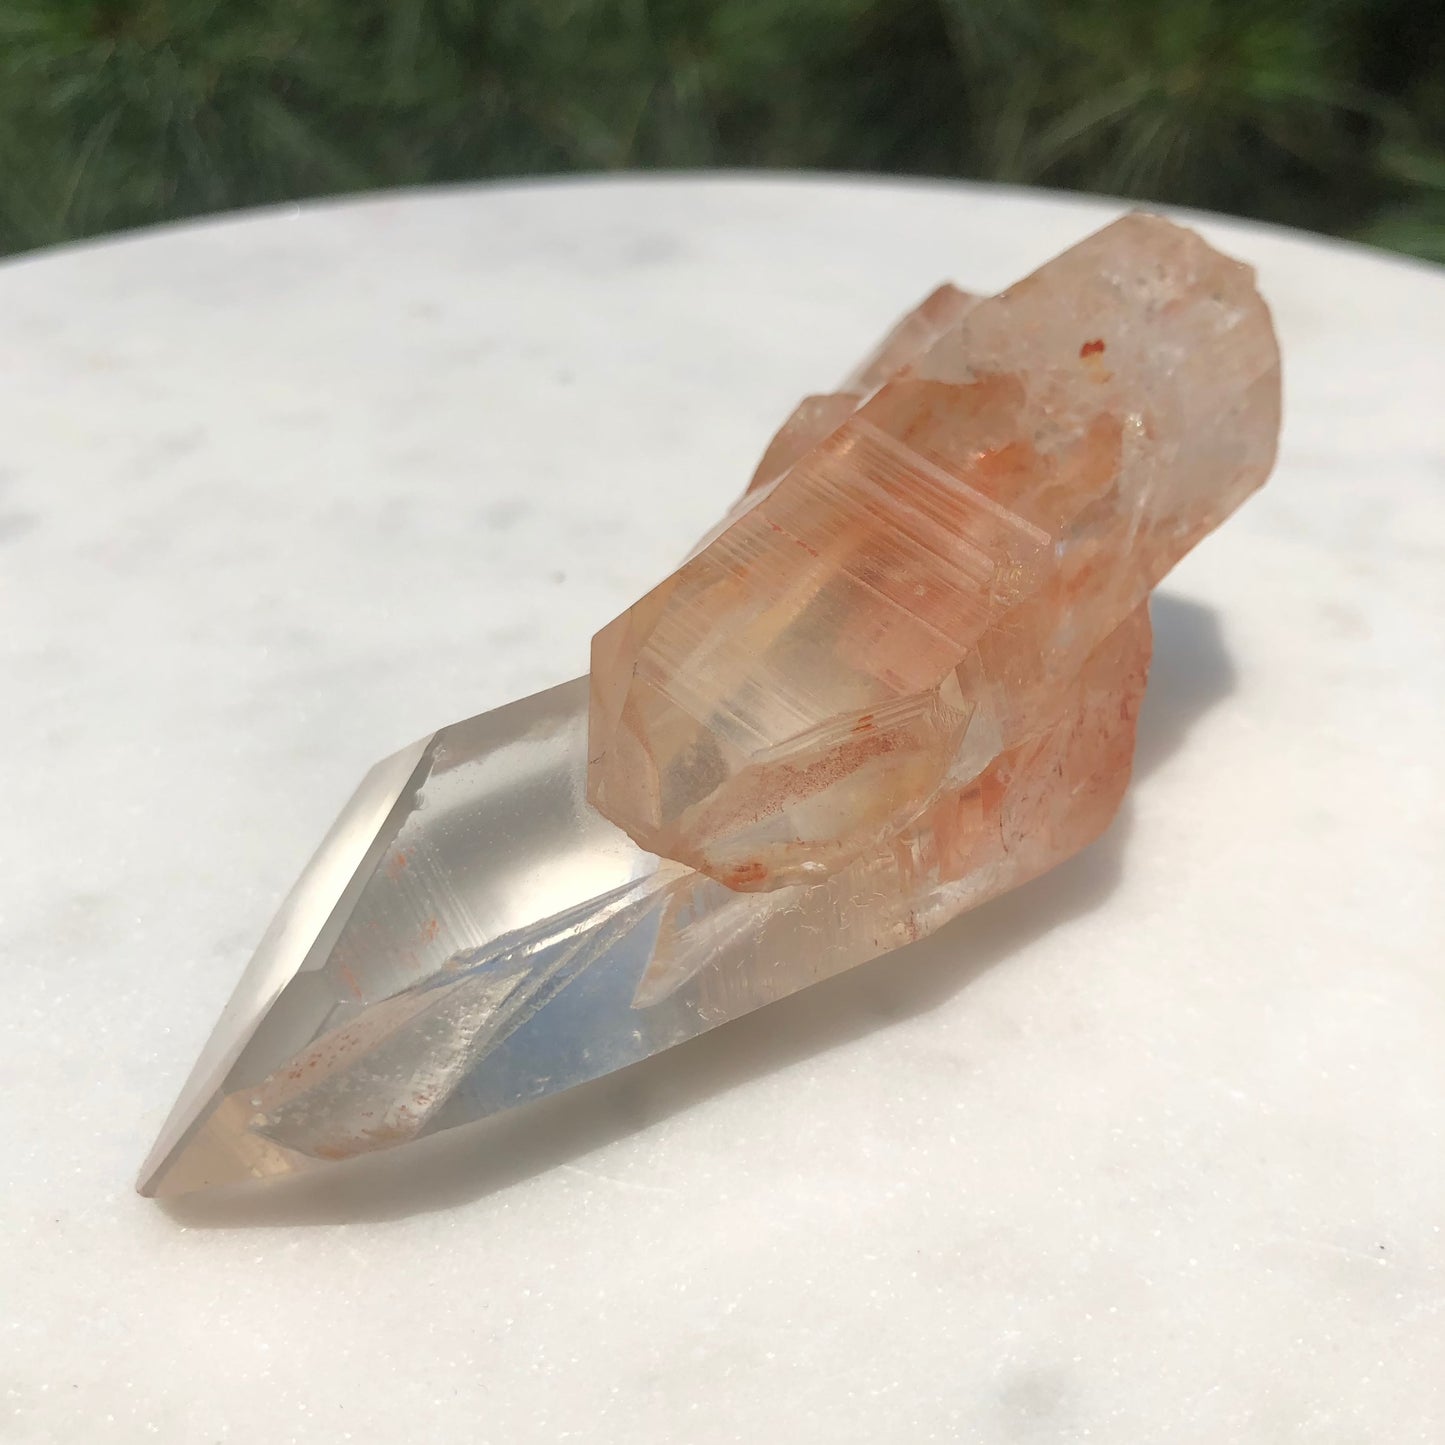 lemurian seed crystal point born in Brazil